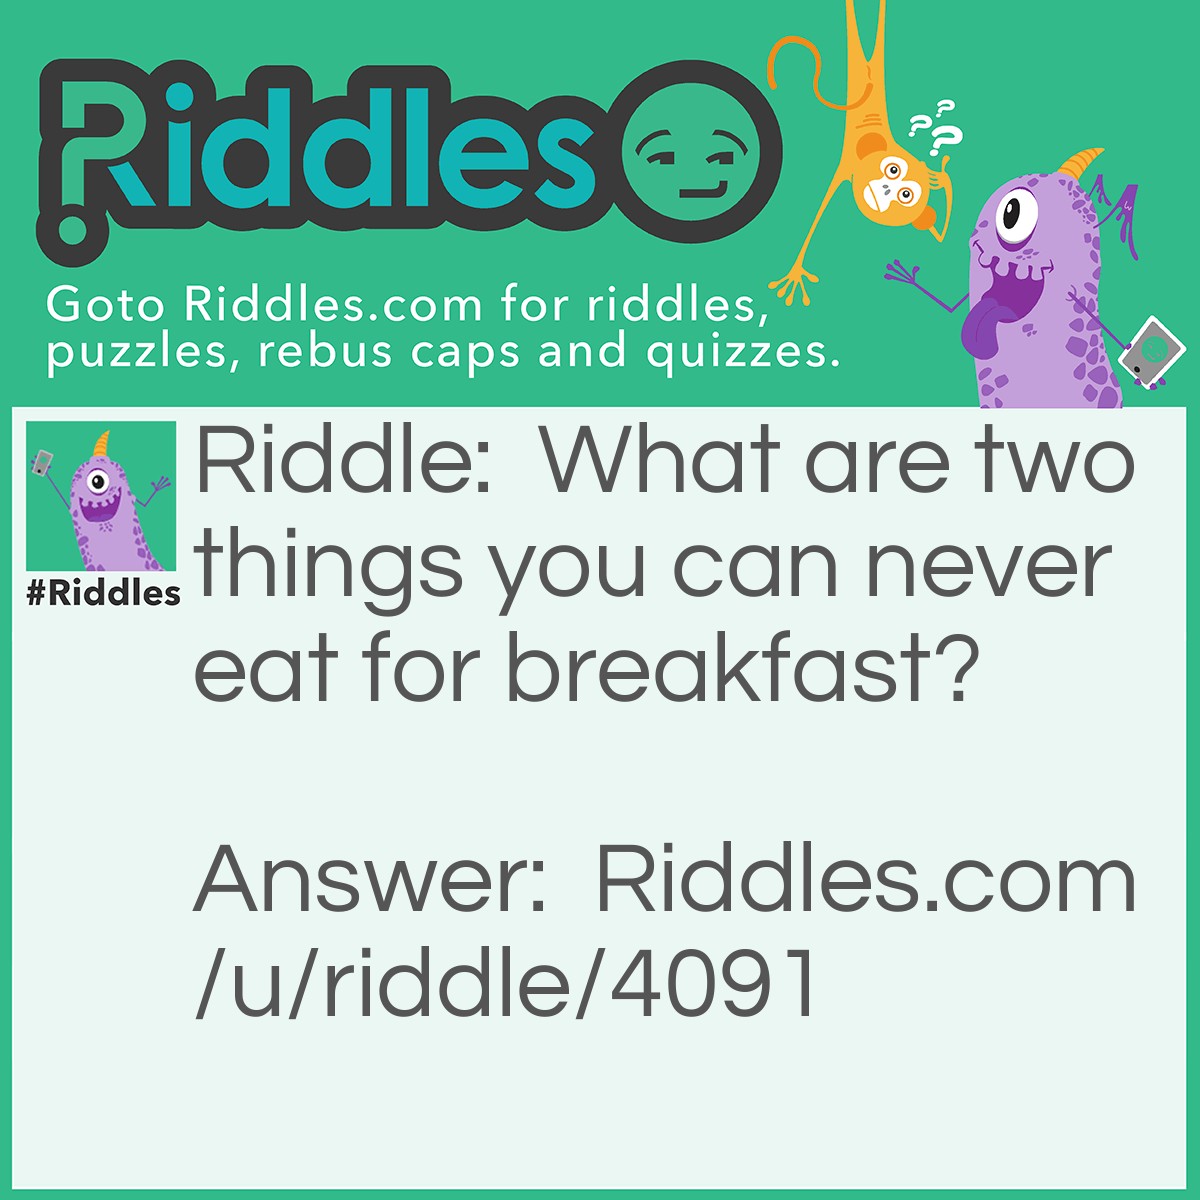 Riddle: What are two things you can never eat for breakfast? Answer: Lunch and Dinner.